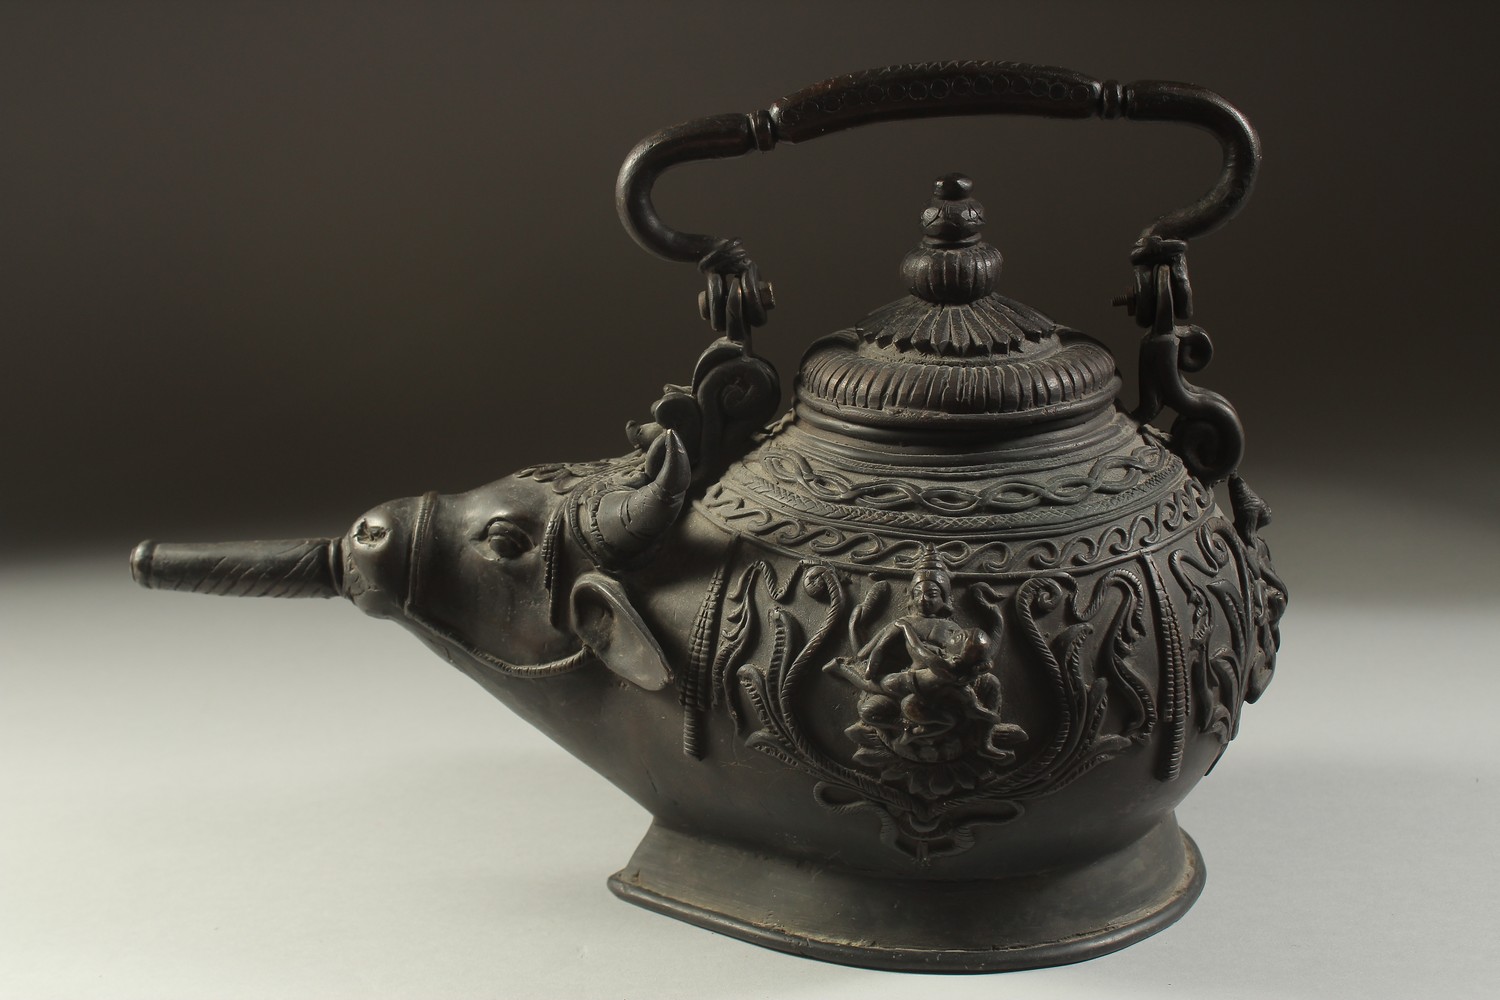 A FINE AND UNUSUAL INDIAN BRONZE EWER, with bulls' head spout and relief hindu deities around the - Image 4 of 5